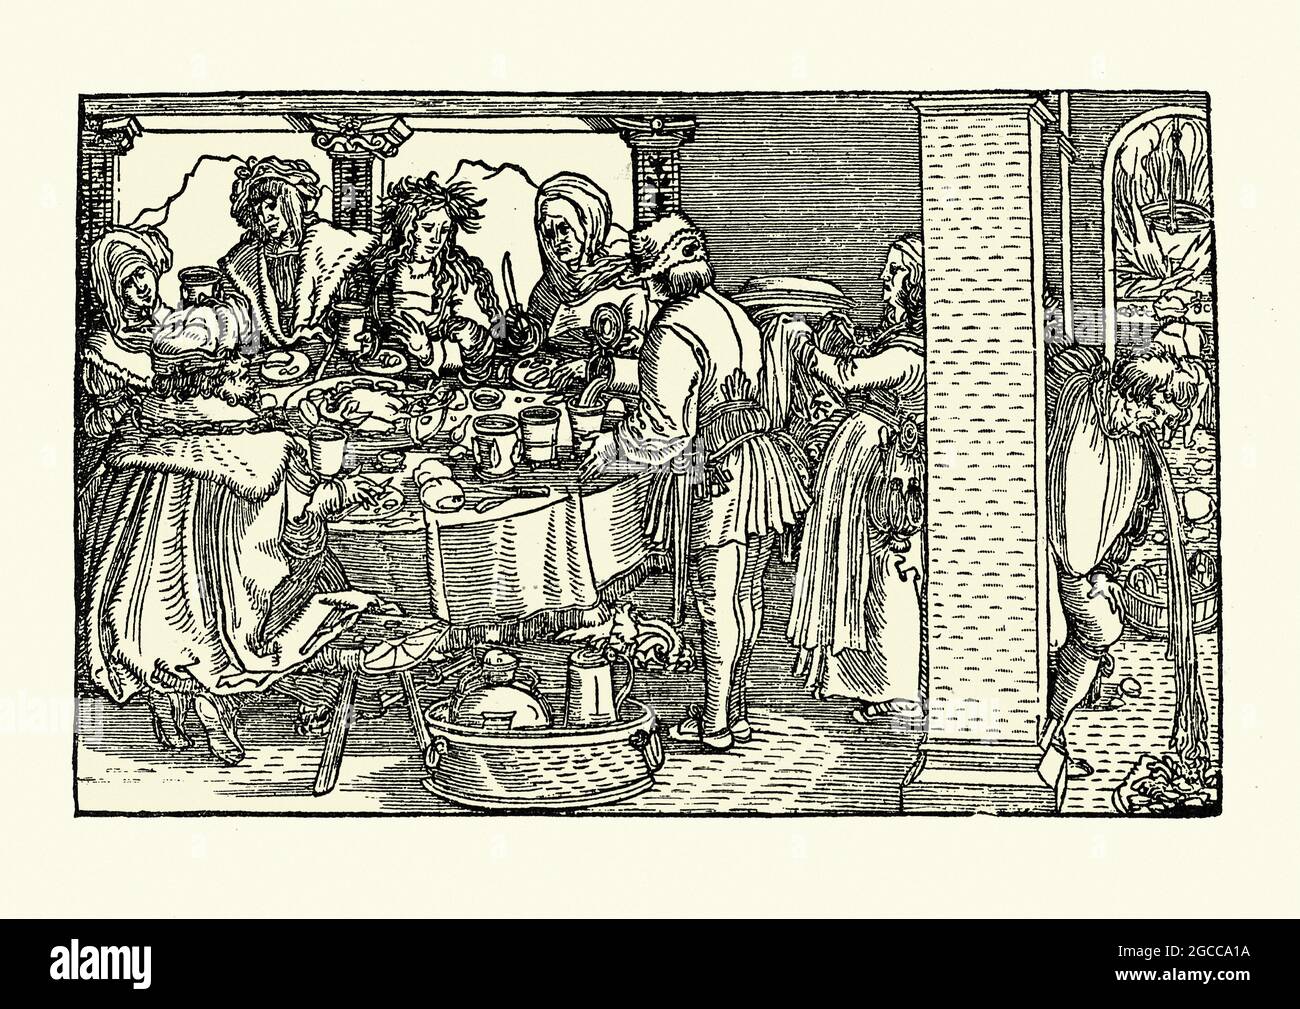 Vintage illustration Feast for the rich, People eating grand meal, man vomiting from overeating , German. 16TH Century Hans Burgkmair Stock Photo